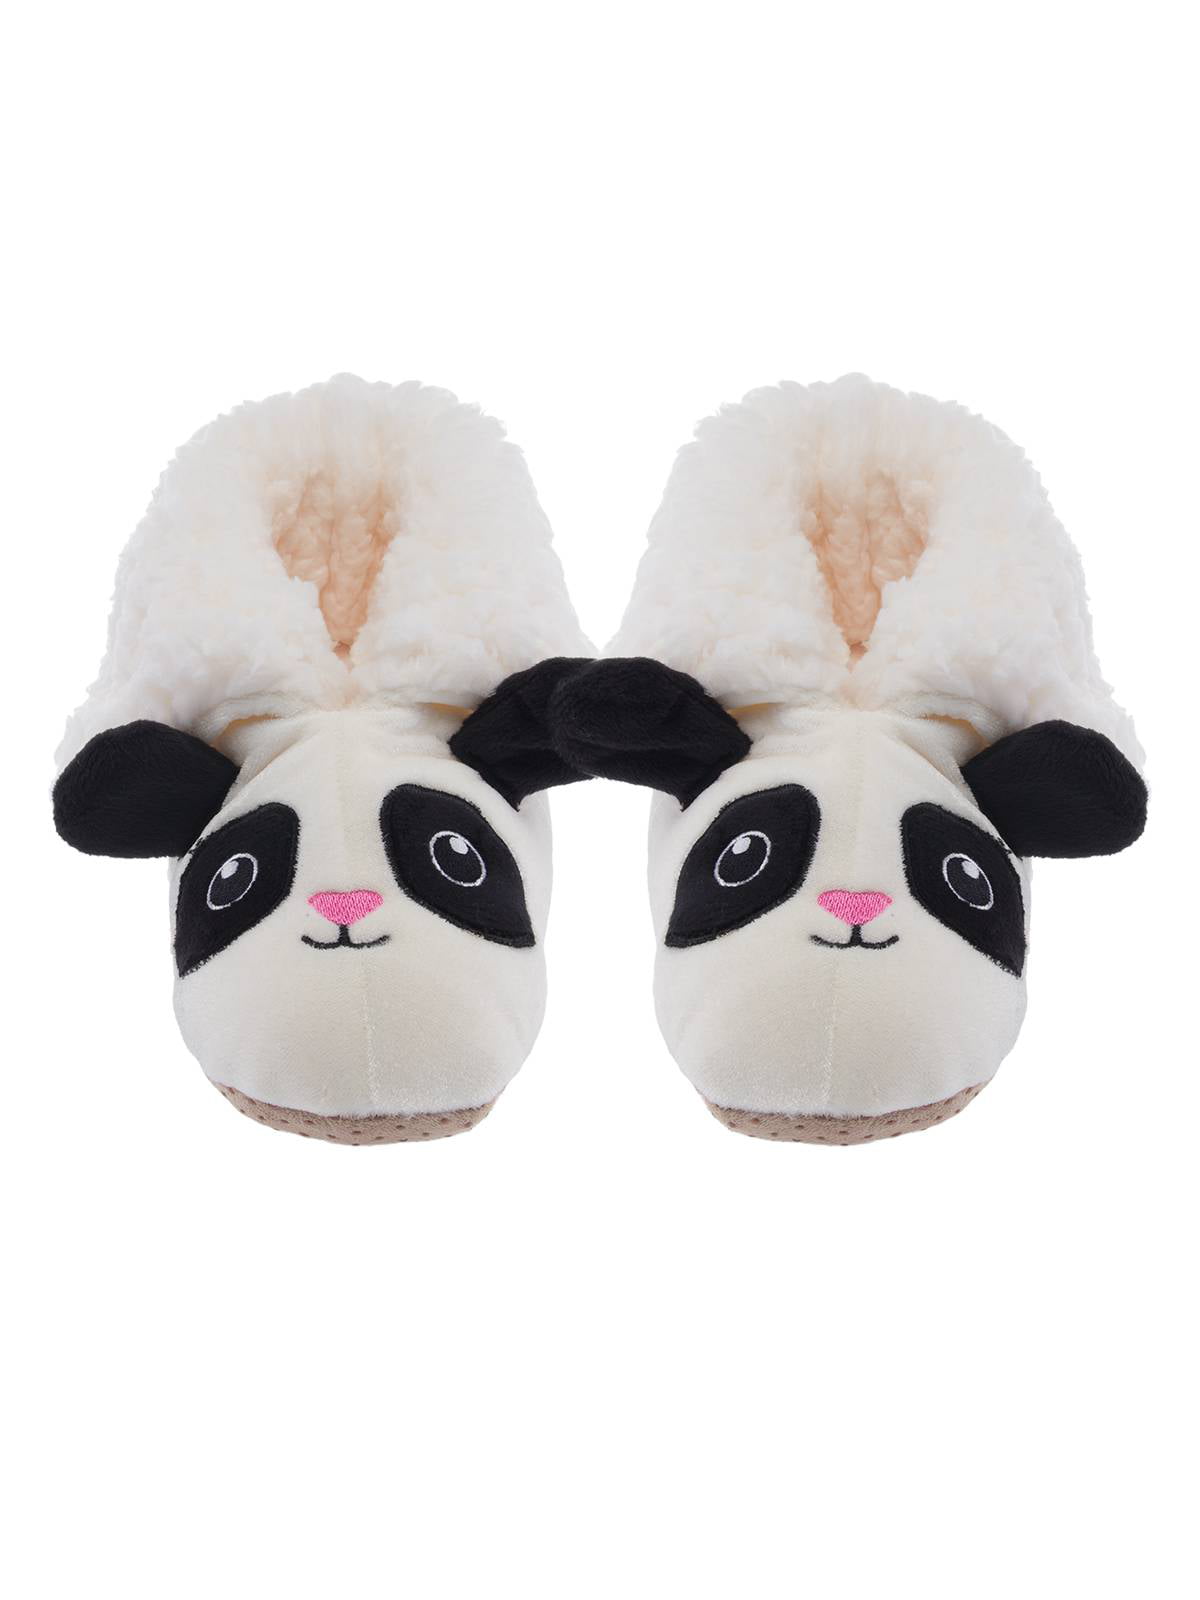 Girls 3D Novelty Plush Character Slippers Kids Mules Booties Shoes Xmas Gift 